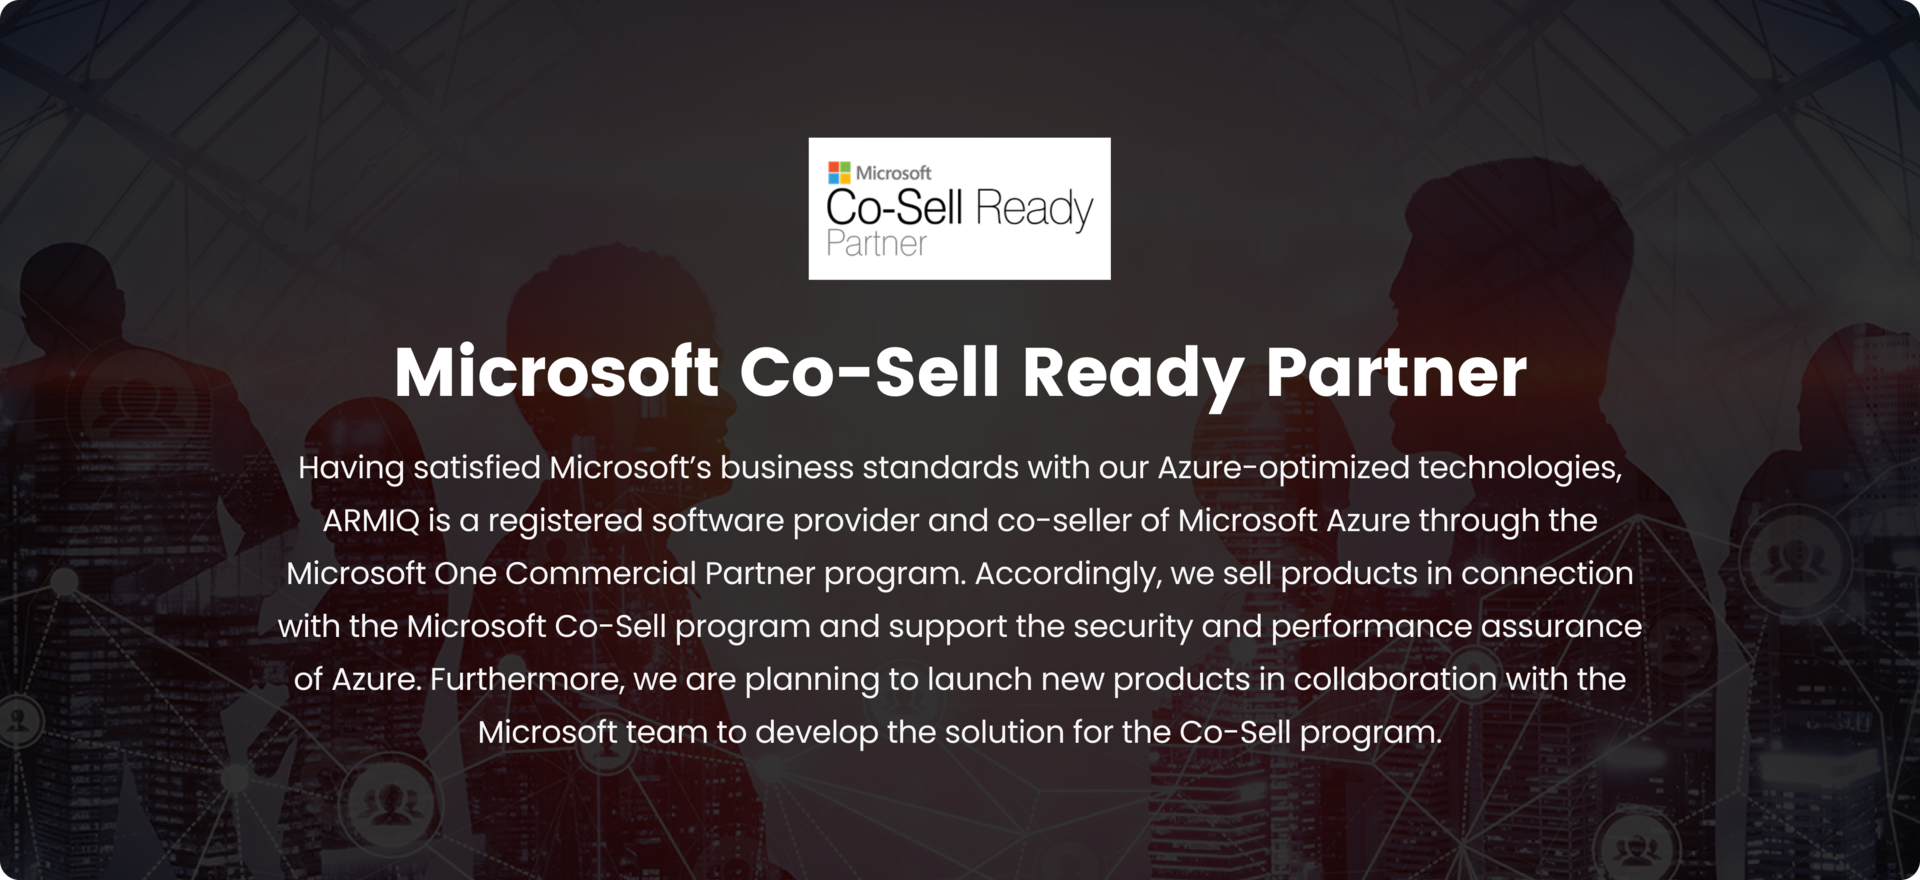 Microsoft Co-Sell Ready Partner, Having satisfied Microsoft’s business standards with our Azure-optimized technologies, ARMIQ is a registered software provider and co-seller of Microsoft Azure through the Microsoft One Commercial Partner program. Accordingly, we sell products in connection with the Microsoft Co-Sell program and support the security and performance assurance of Azure. Furthermore, we are planning to launch new products in collaboration with the Microsoft team to develop the solution for the Co-Sell program.